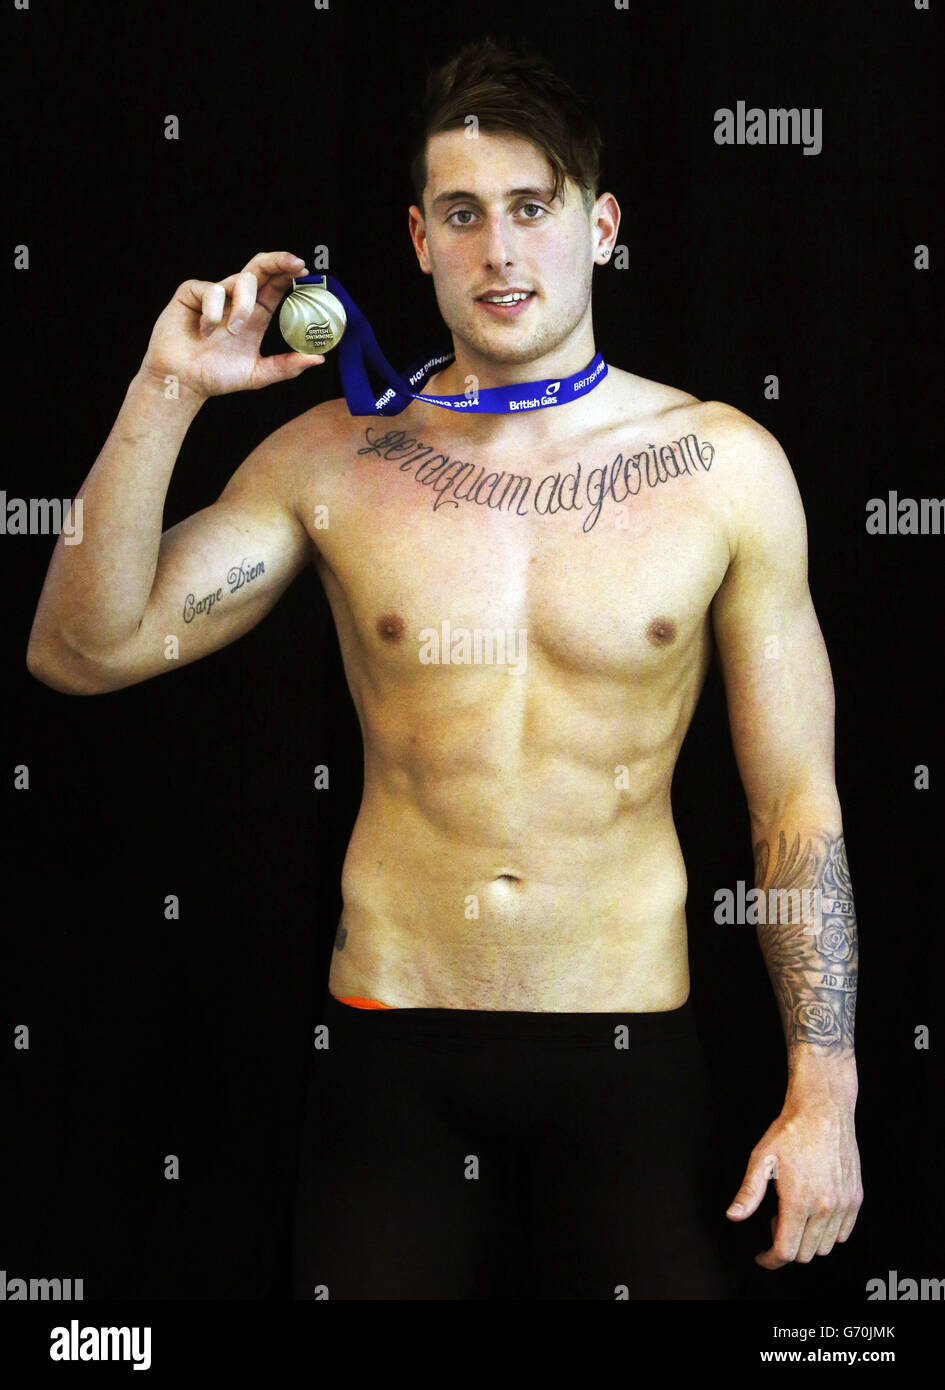 Chris Walker-Hebborn with his medal after winning the Mens Open 50m Backstroke, during the 2014 British Gas Swimming Championships at Tollcross International Swimming Centre, Glasgow. Stock Photo